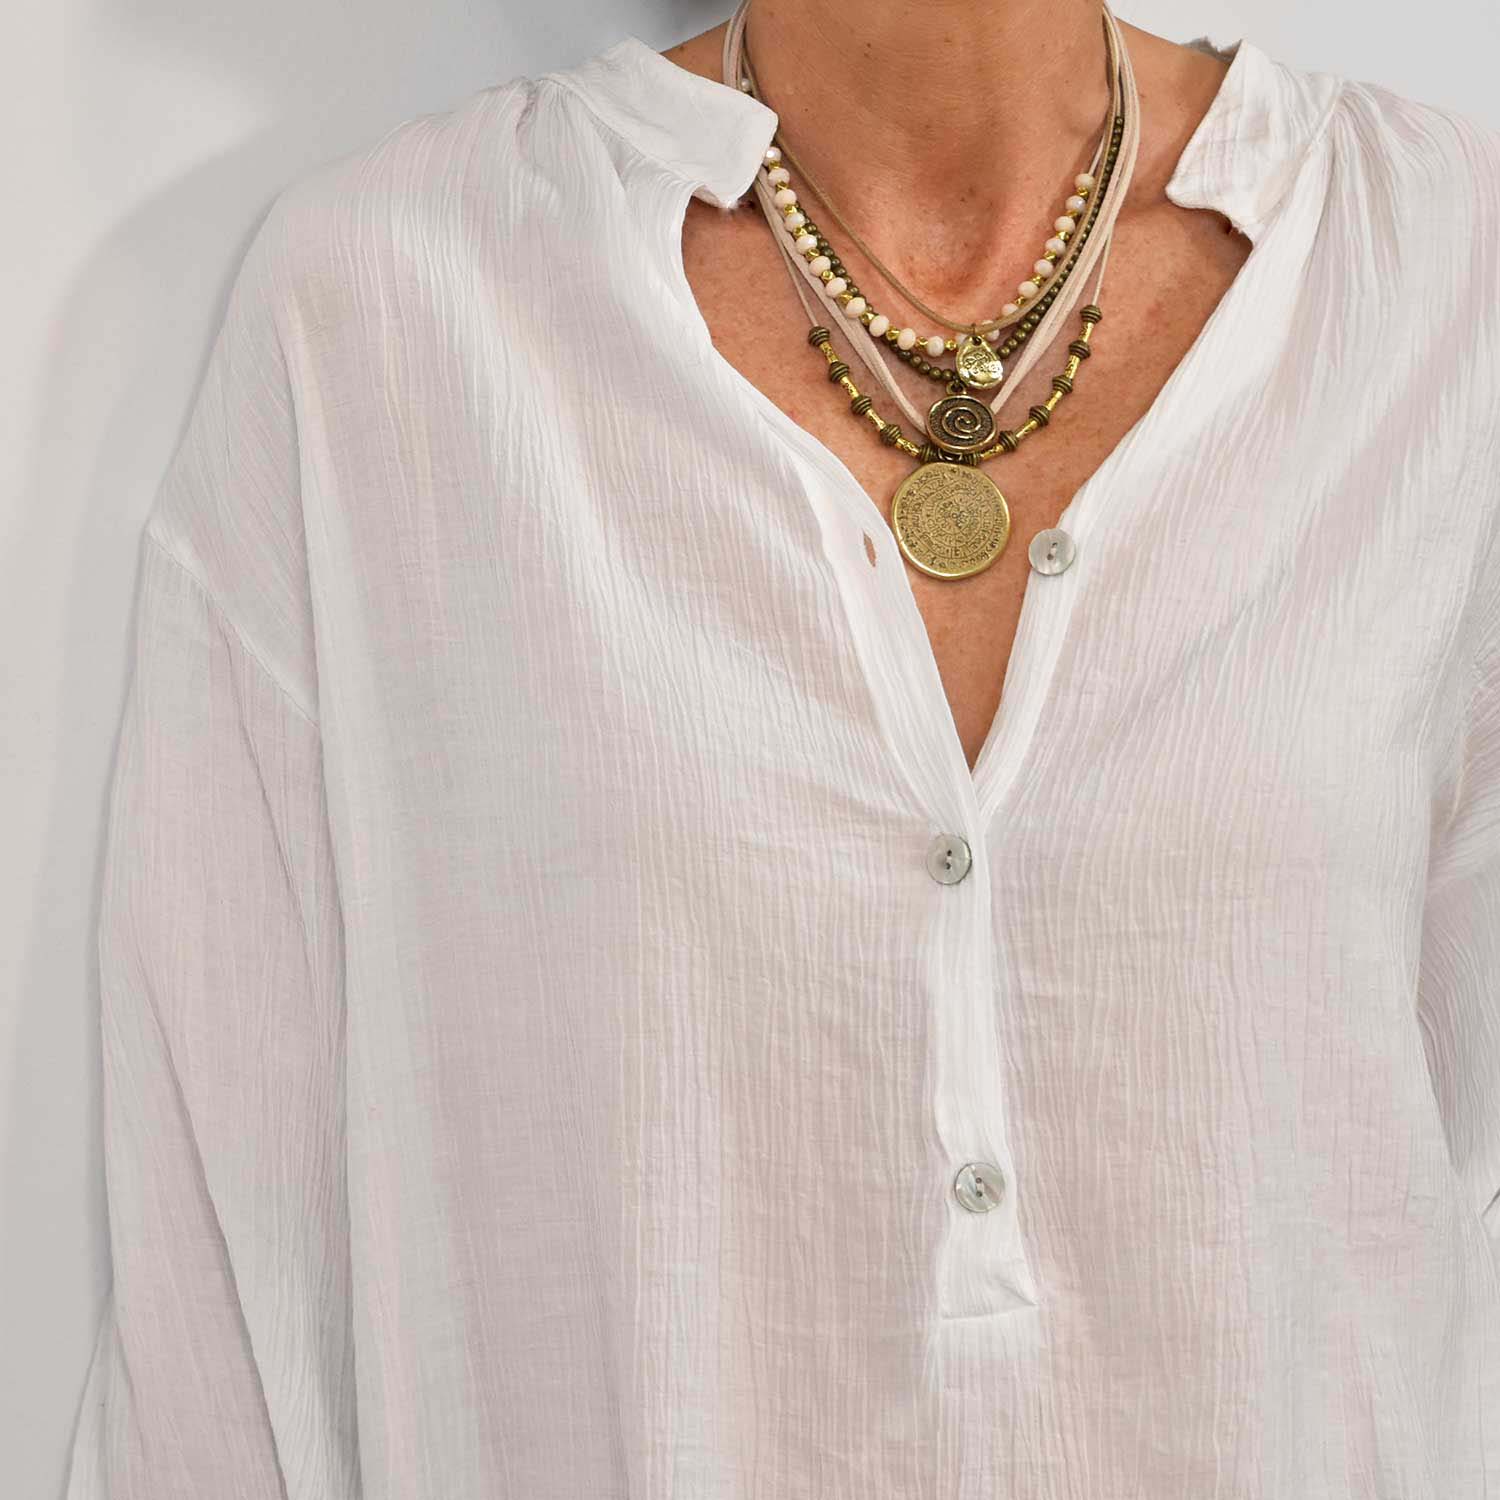 off-white AND GOLDEN LAYERED NECKLACE